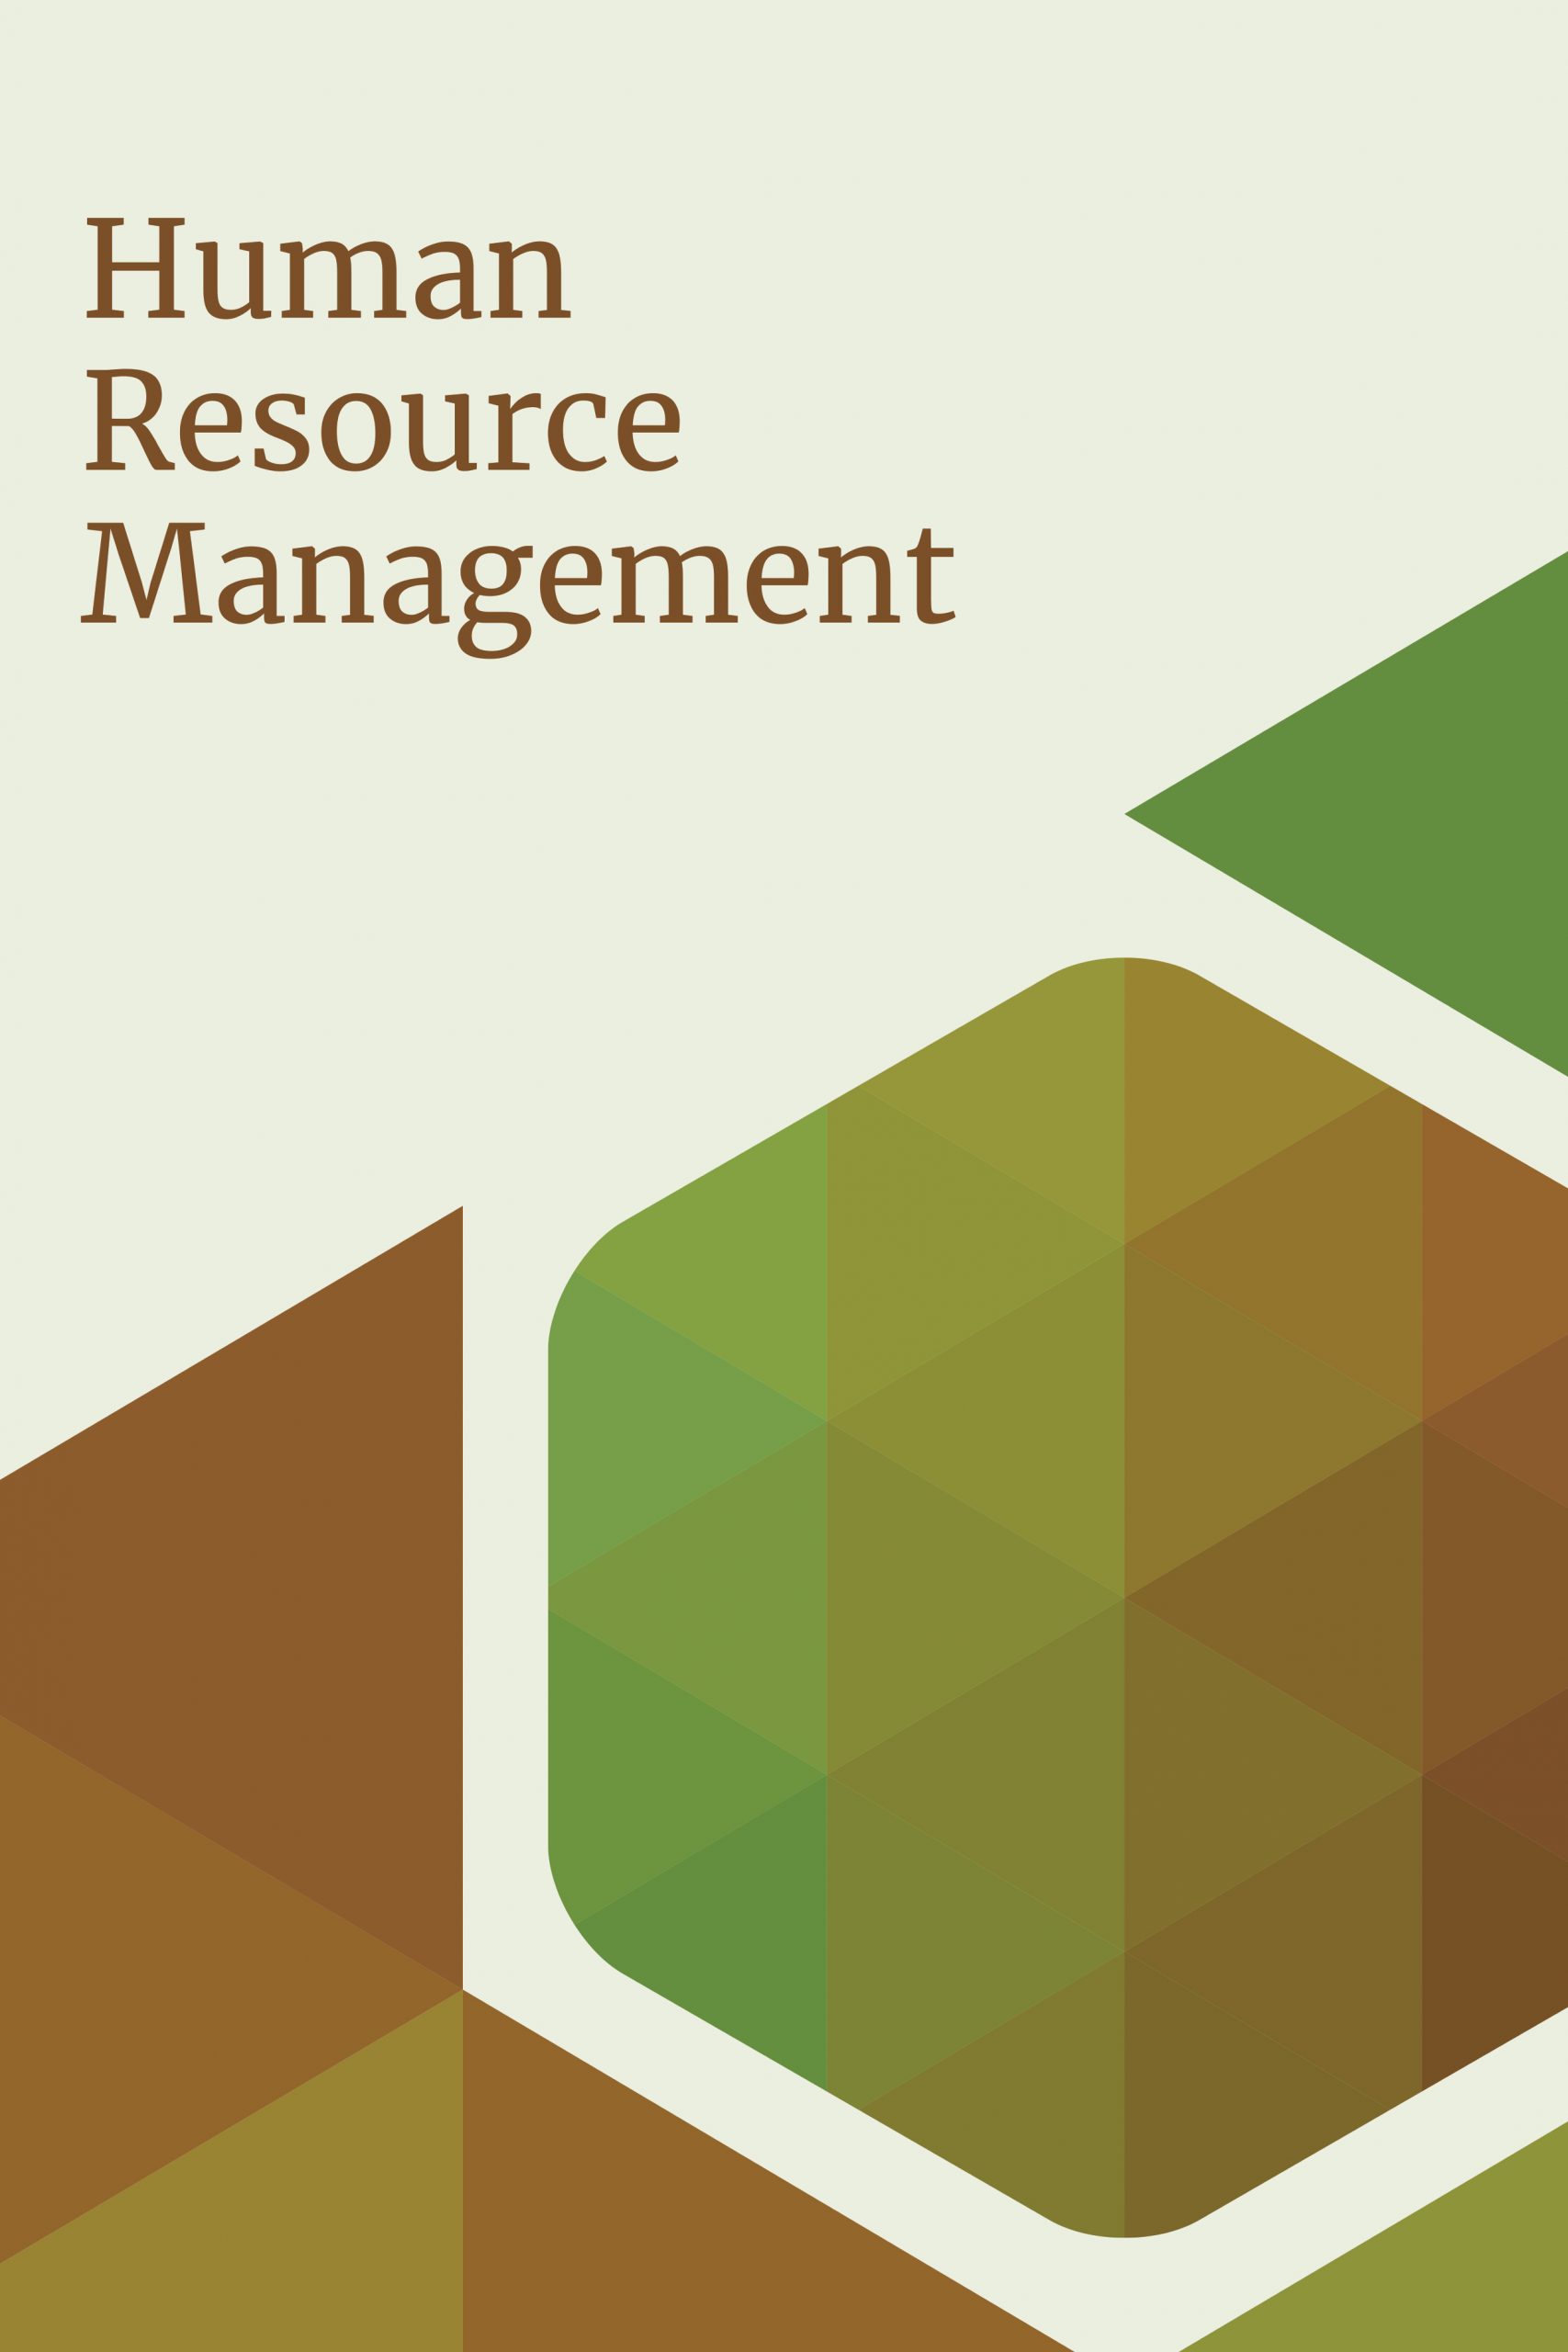 human resource management research titles